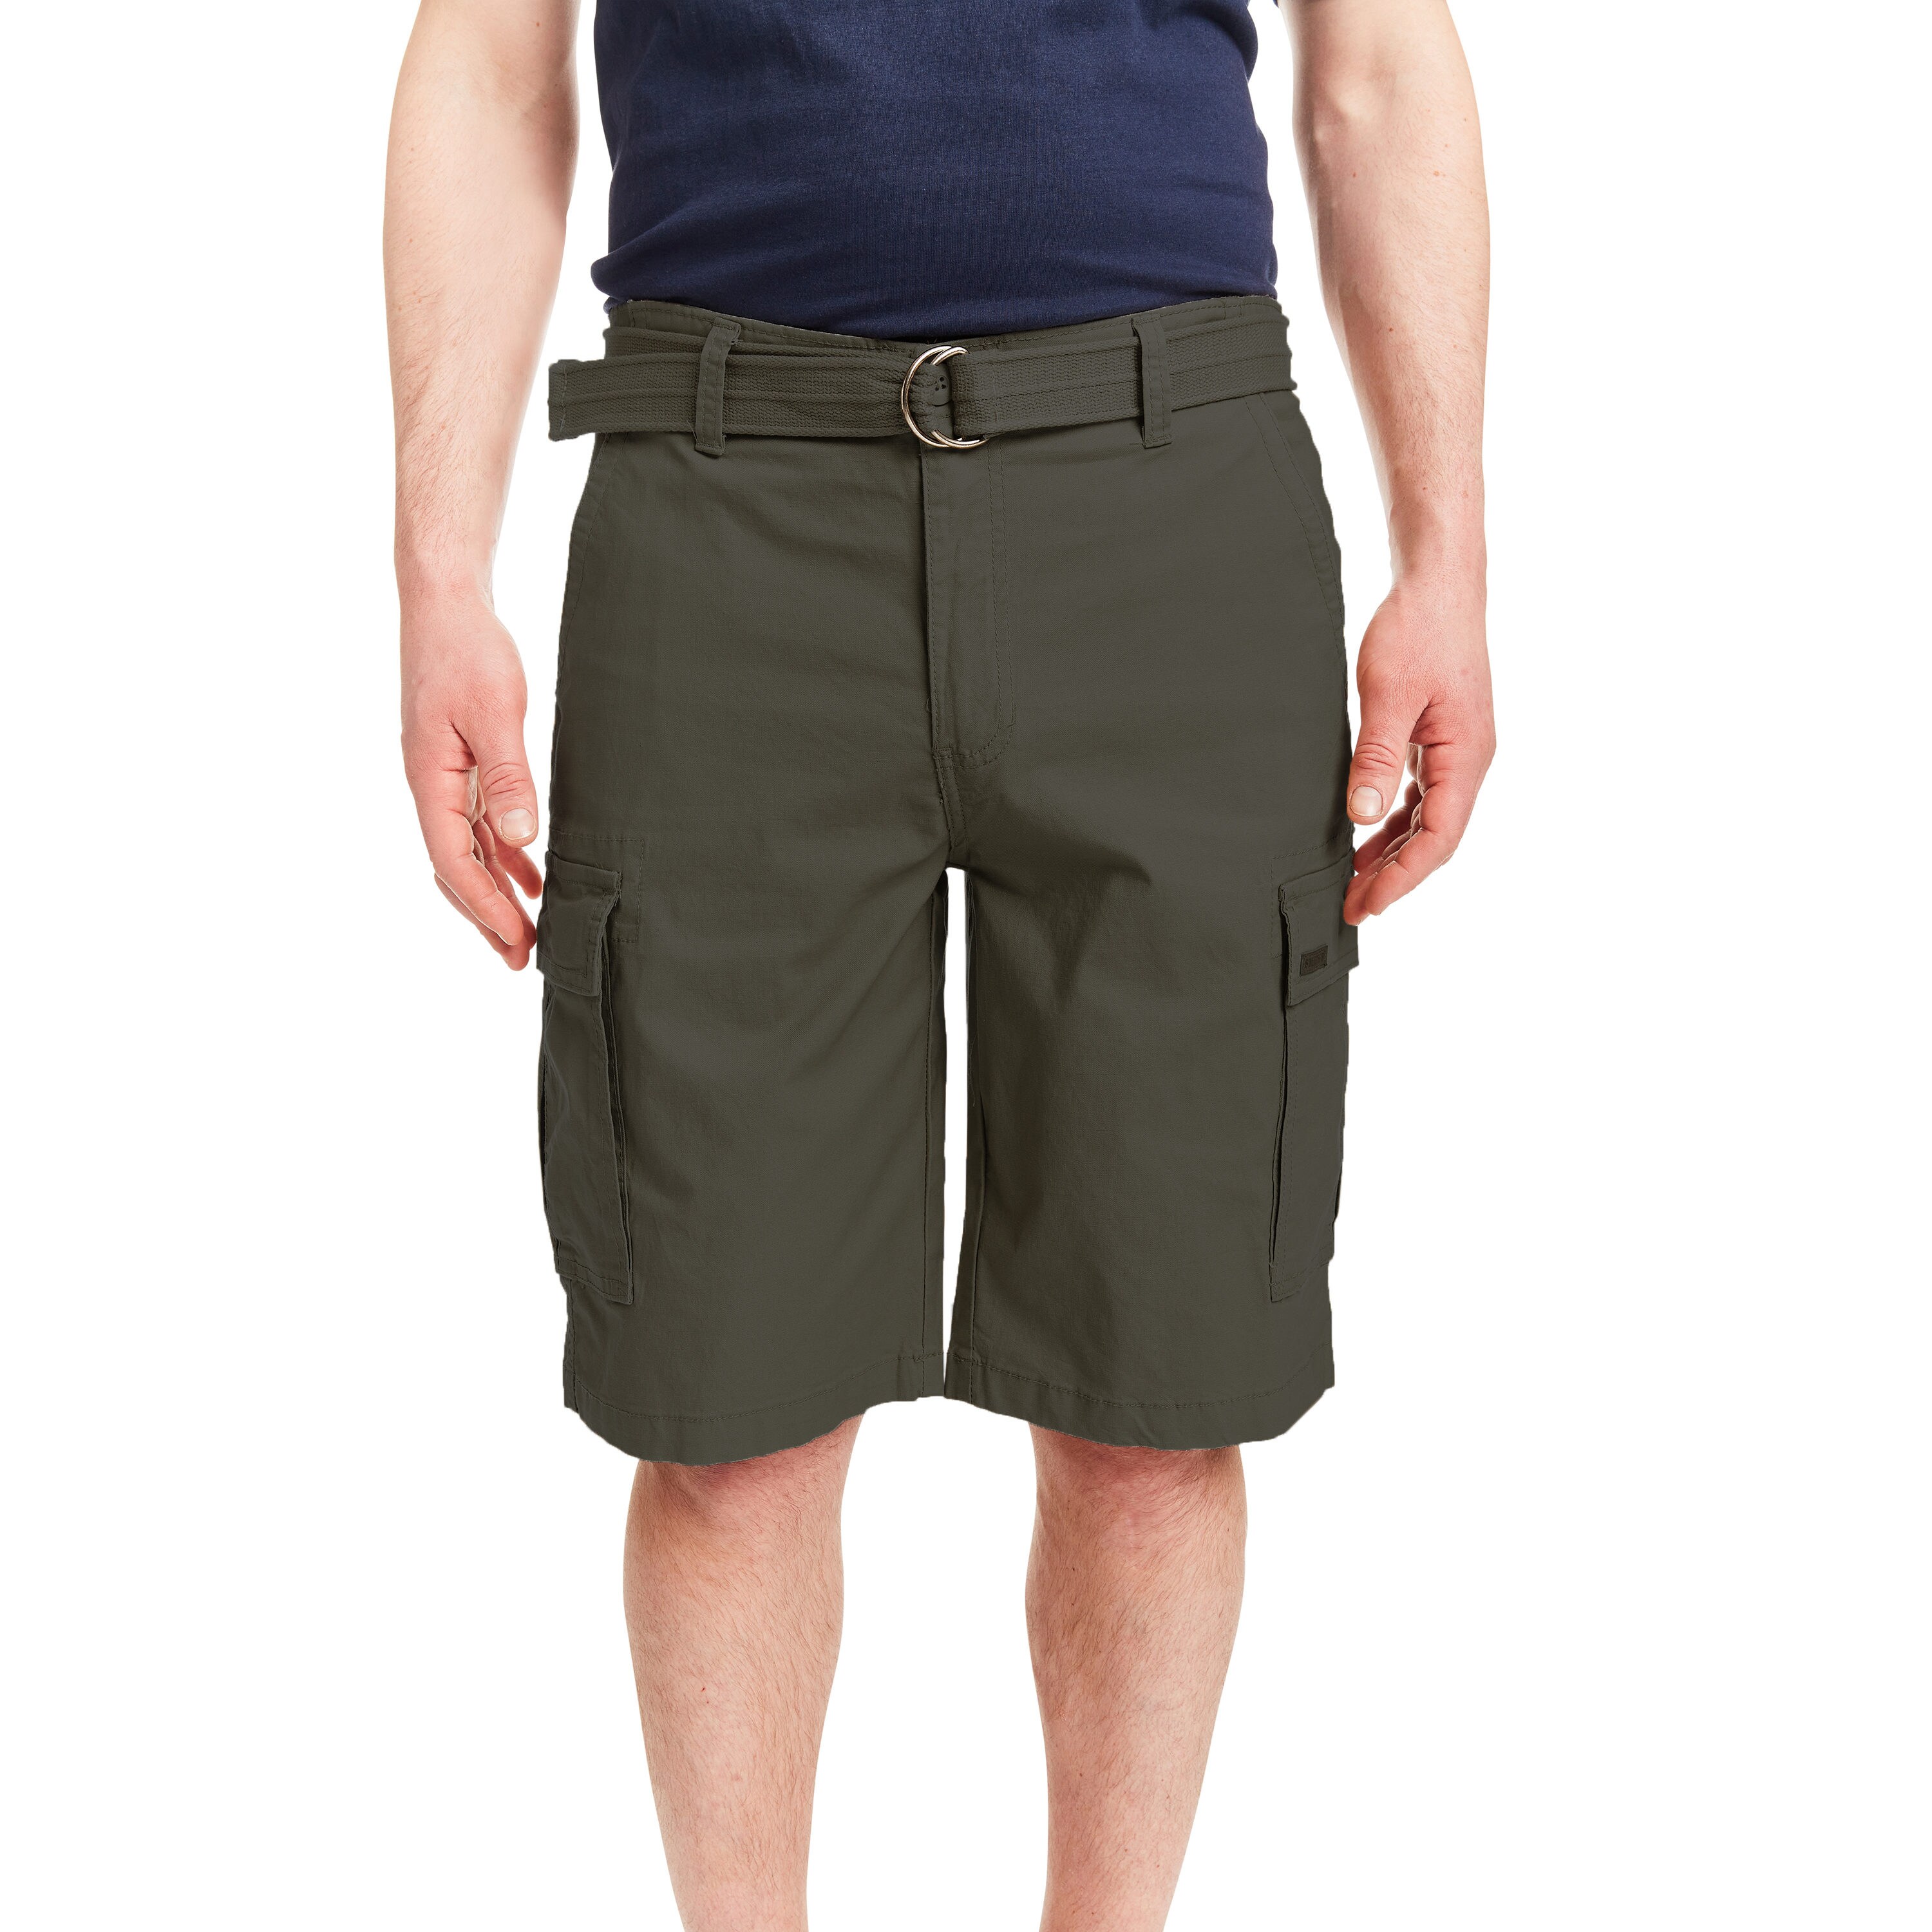 Cargo Shorts at Lowes.com